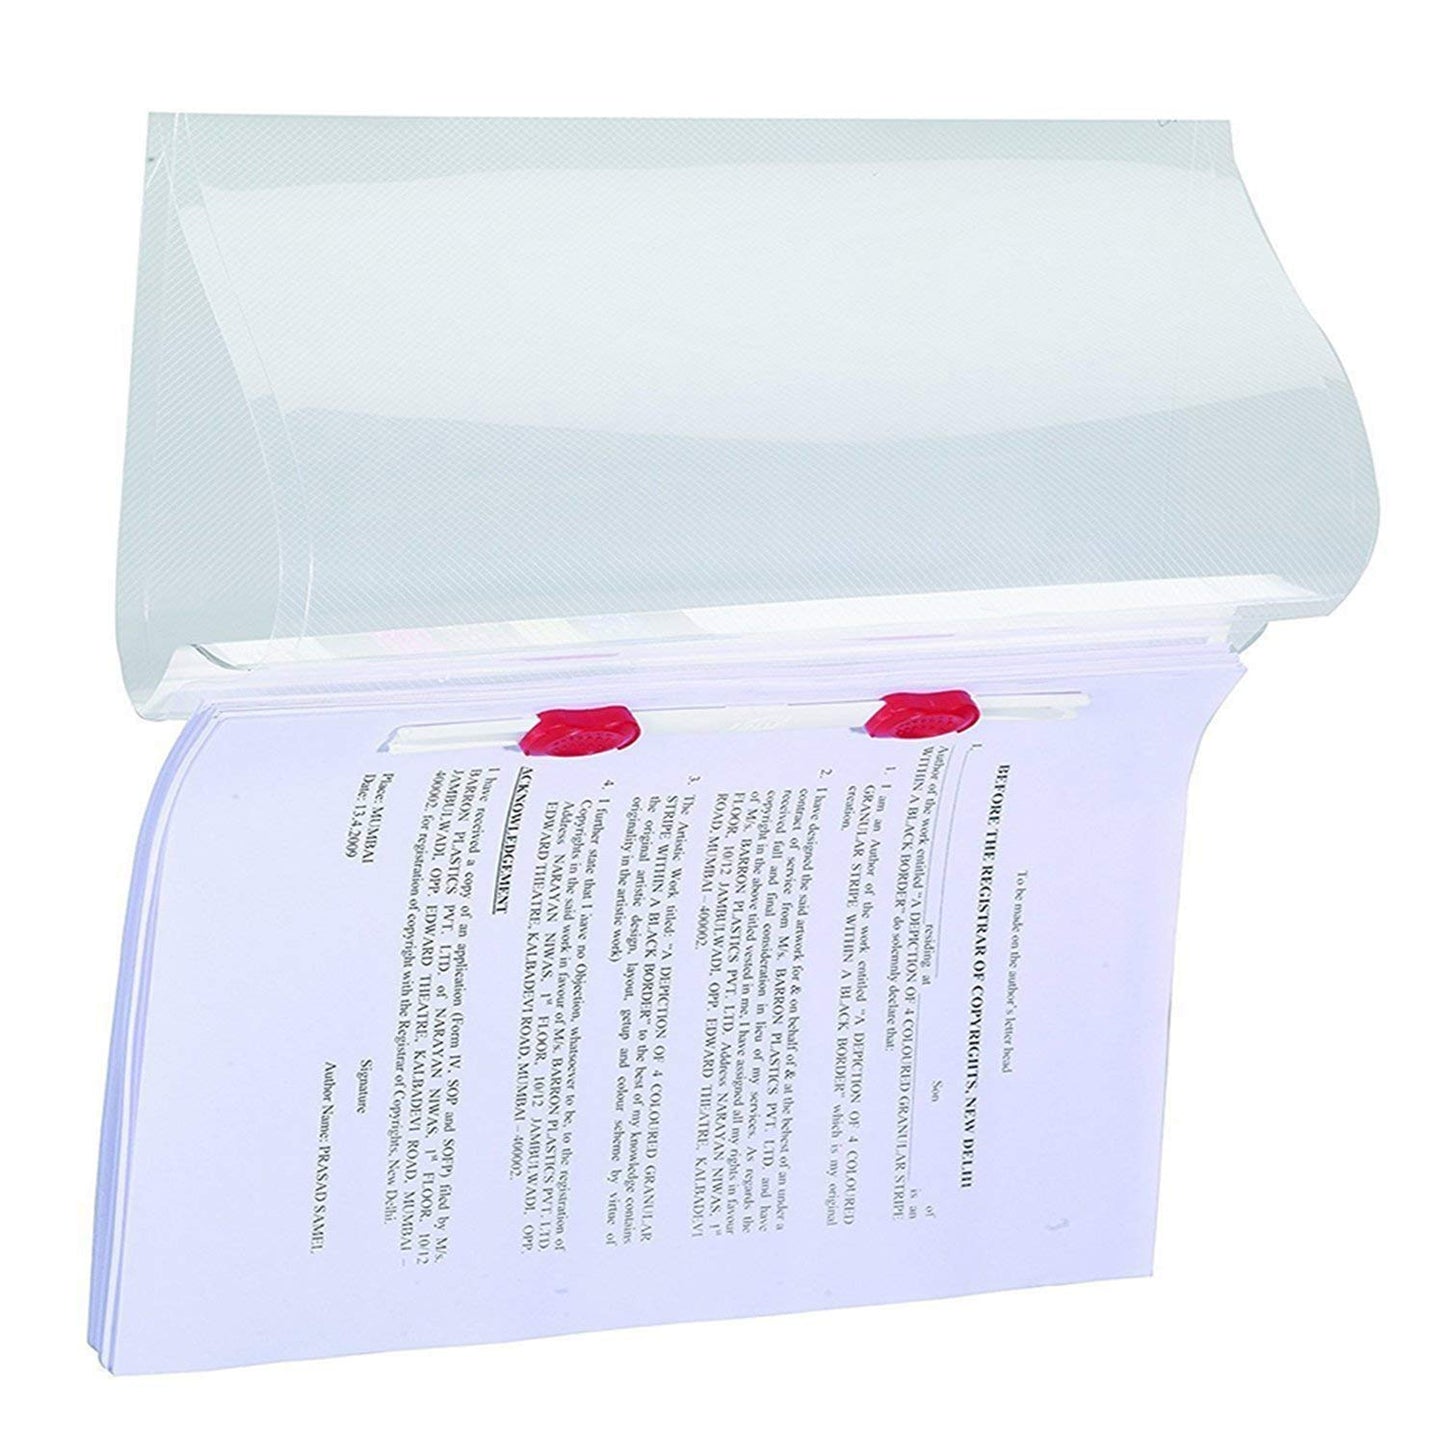 KIYA ® A4 Size Transparent Report File Folder Rf1031 with Plastic Clip for Certificates, Office Documents, Reports, Page Holder, Presentation | Pack of 1 Pieces (Transparent)